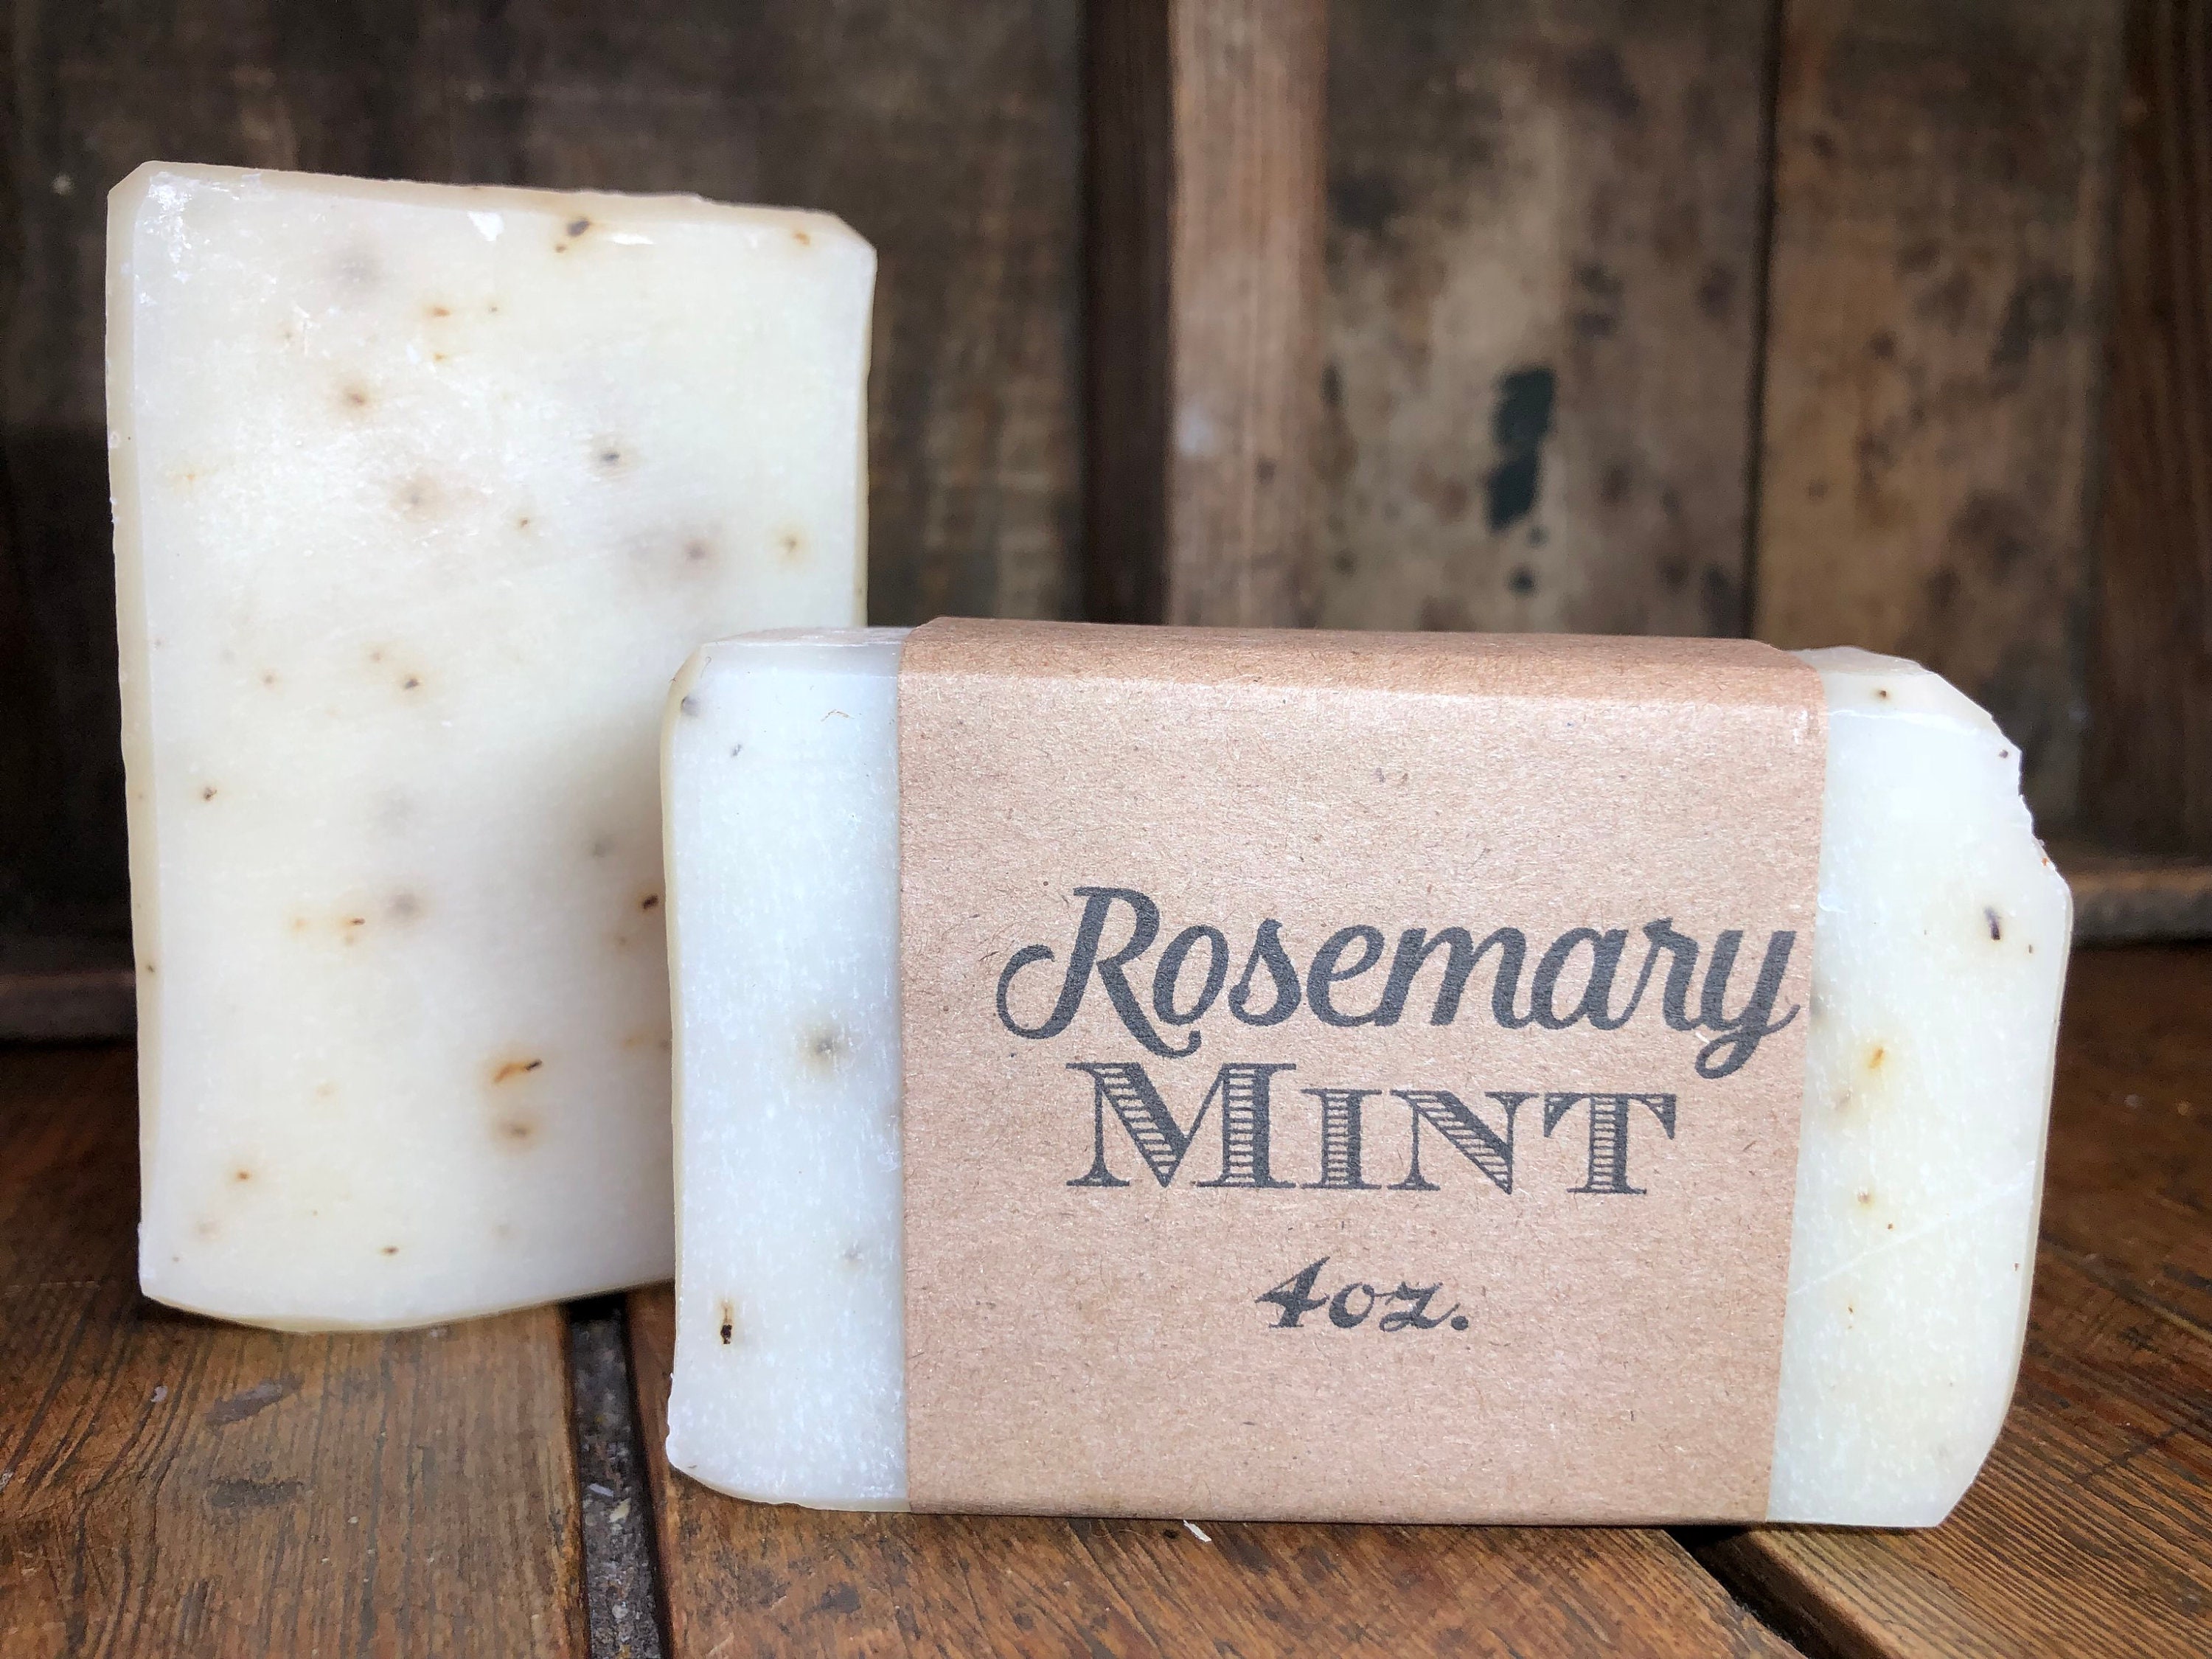 Herb & Scent Soap Stamp: Mint, Sage, Rosemary, Patchouli, Cotton